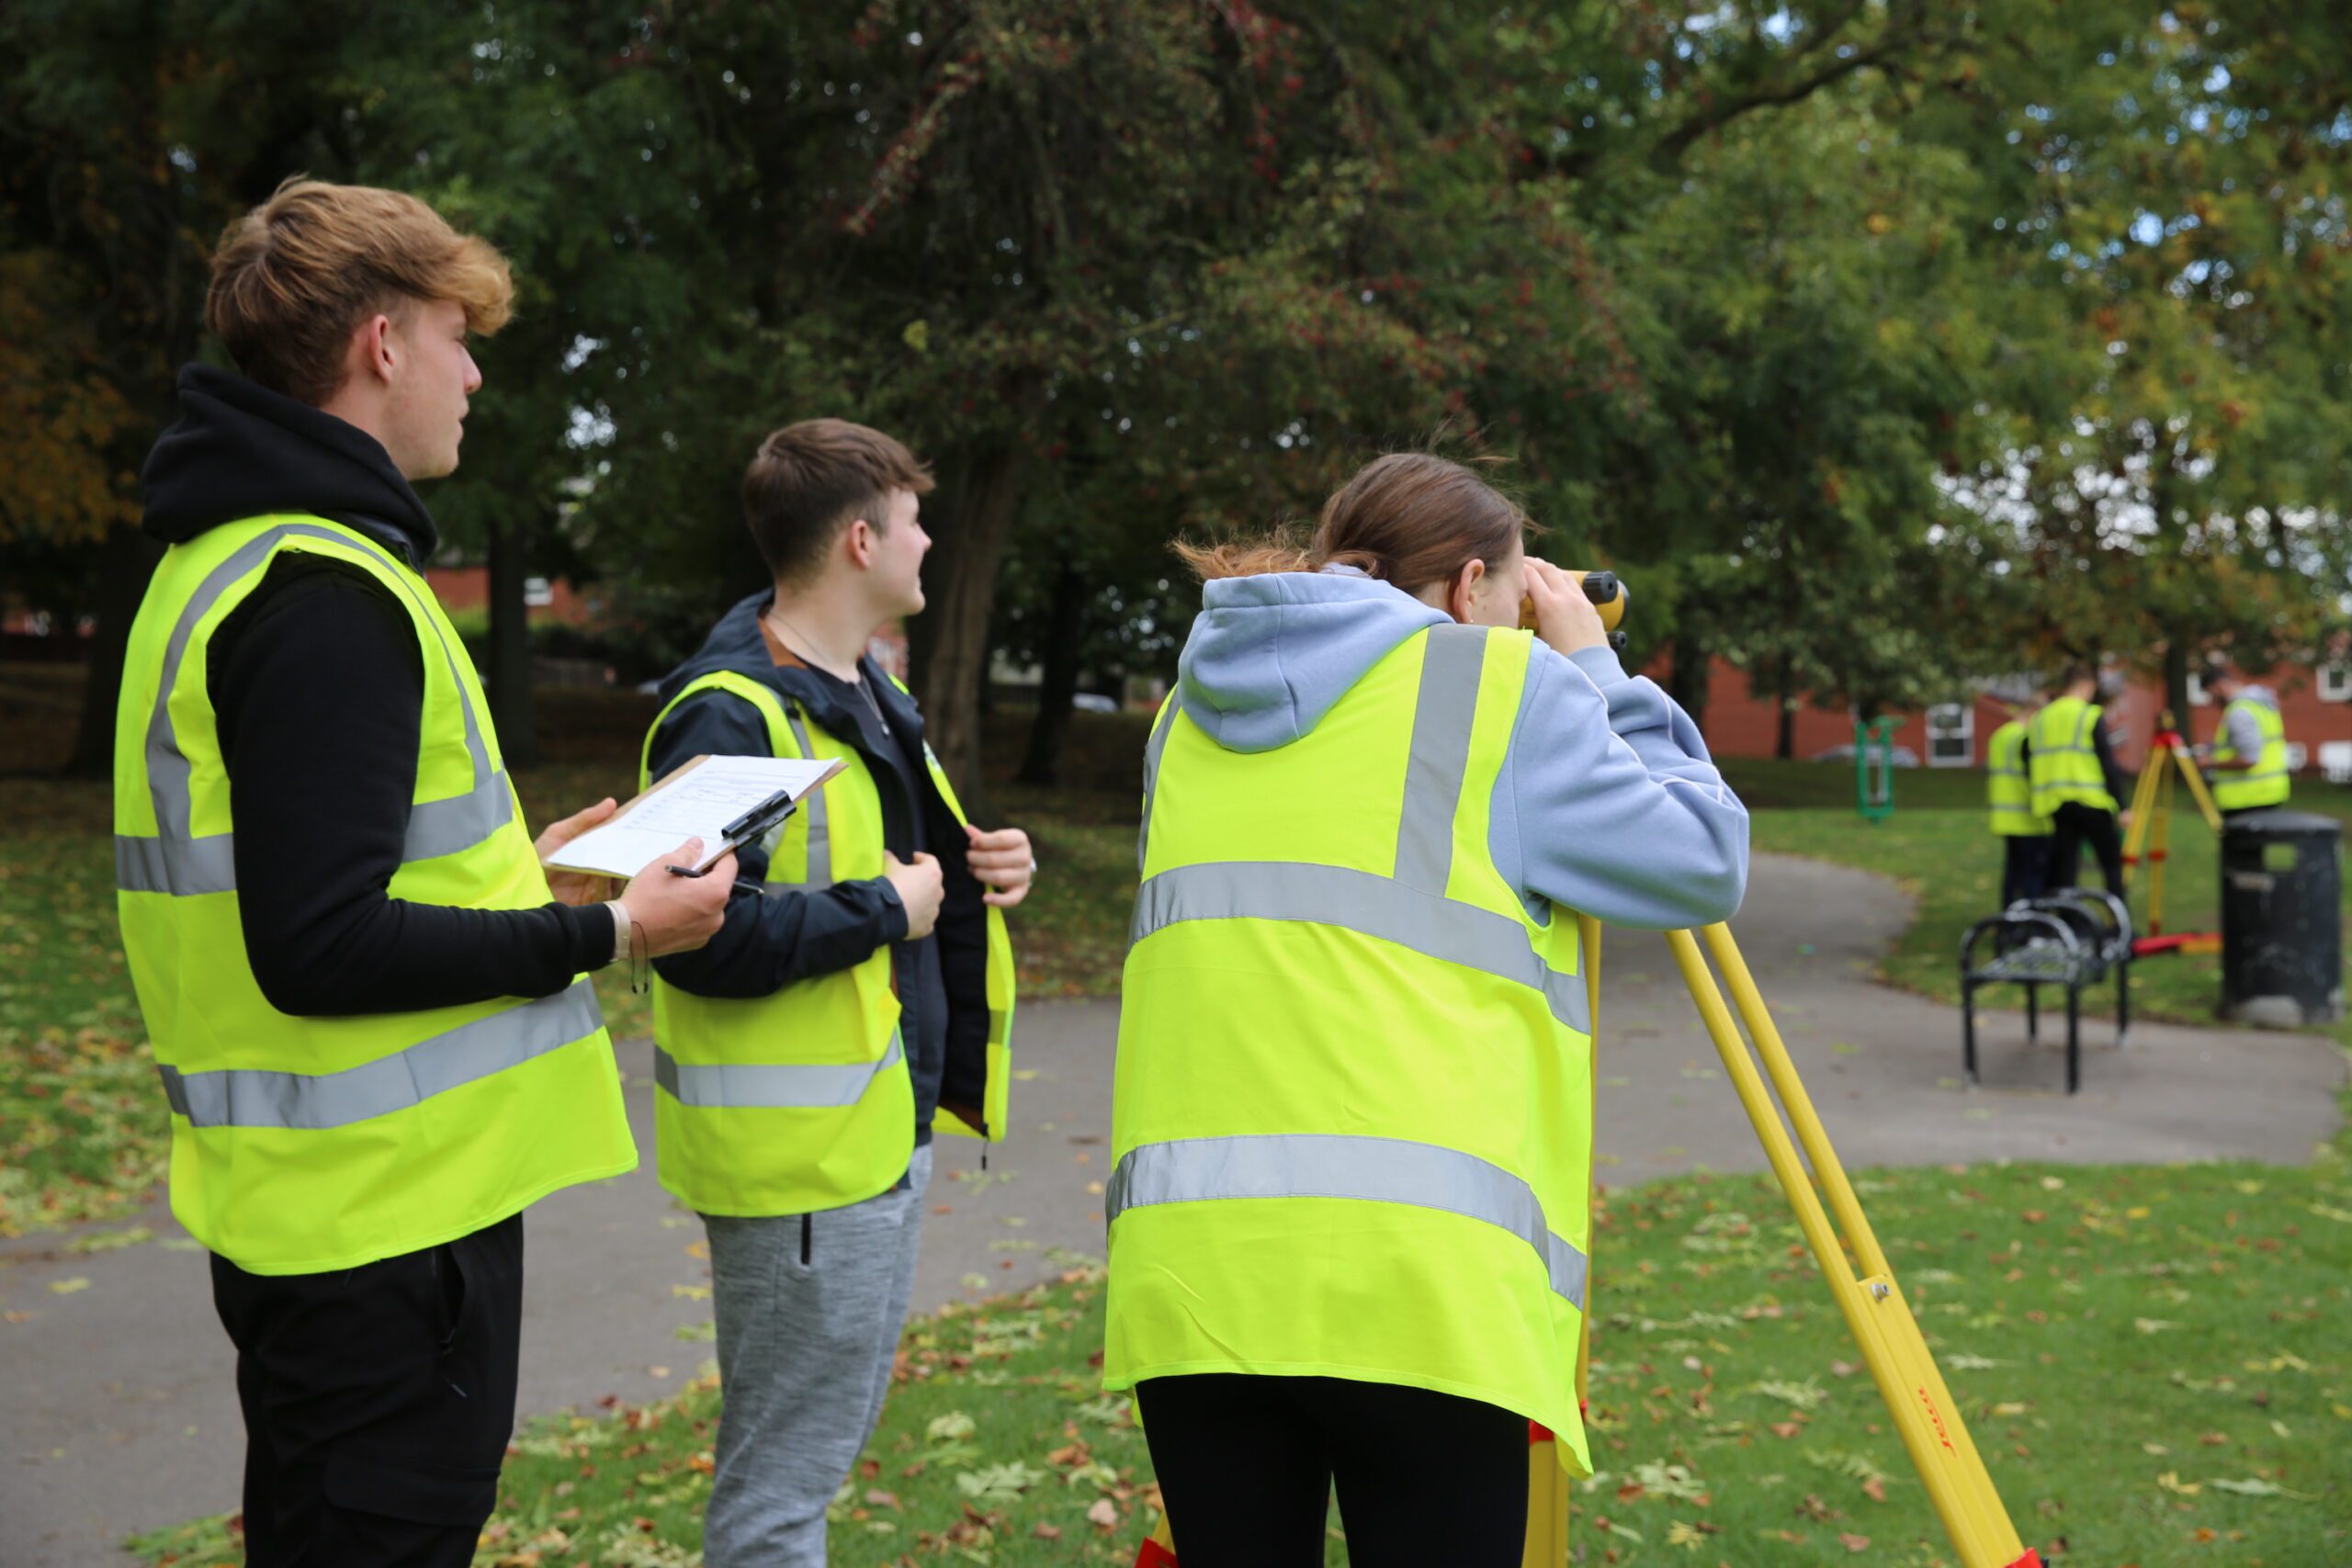 Leeds College of Building T Level students practise levelling – a practical application of surveying methods learnt in the classroom.